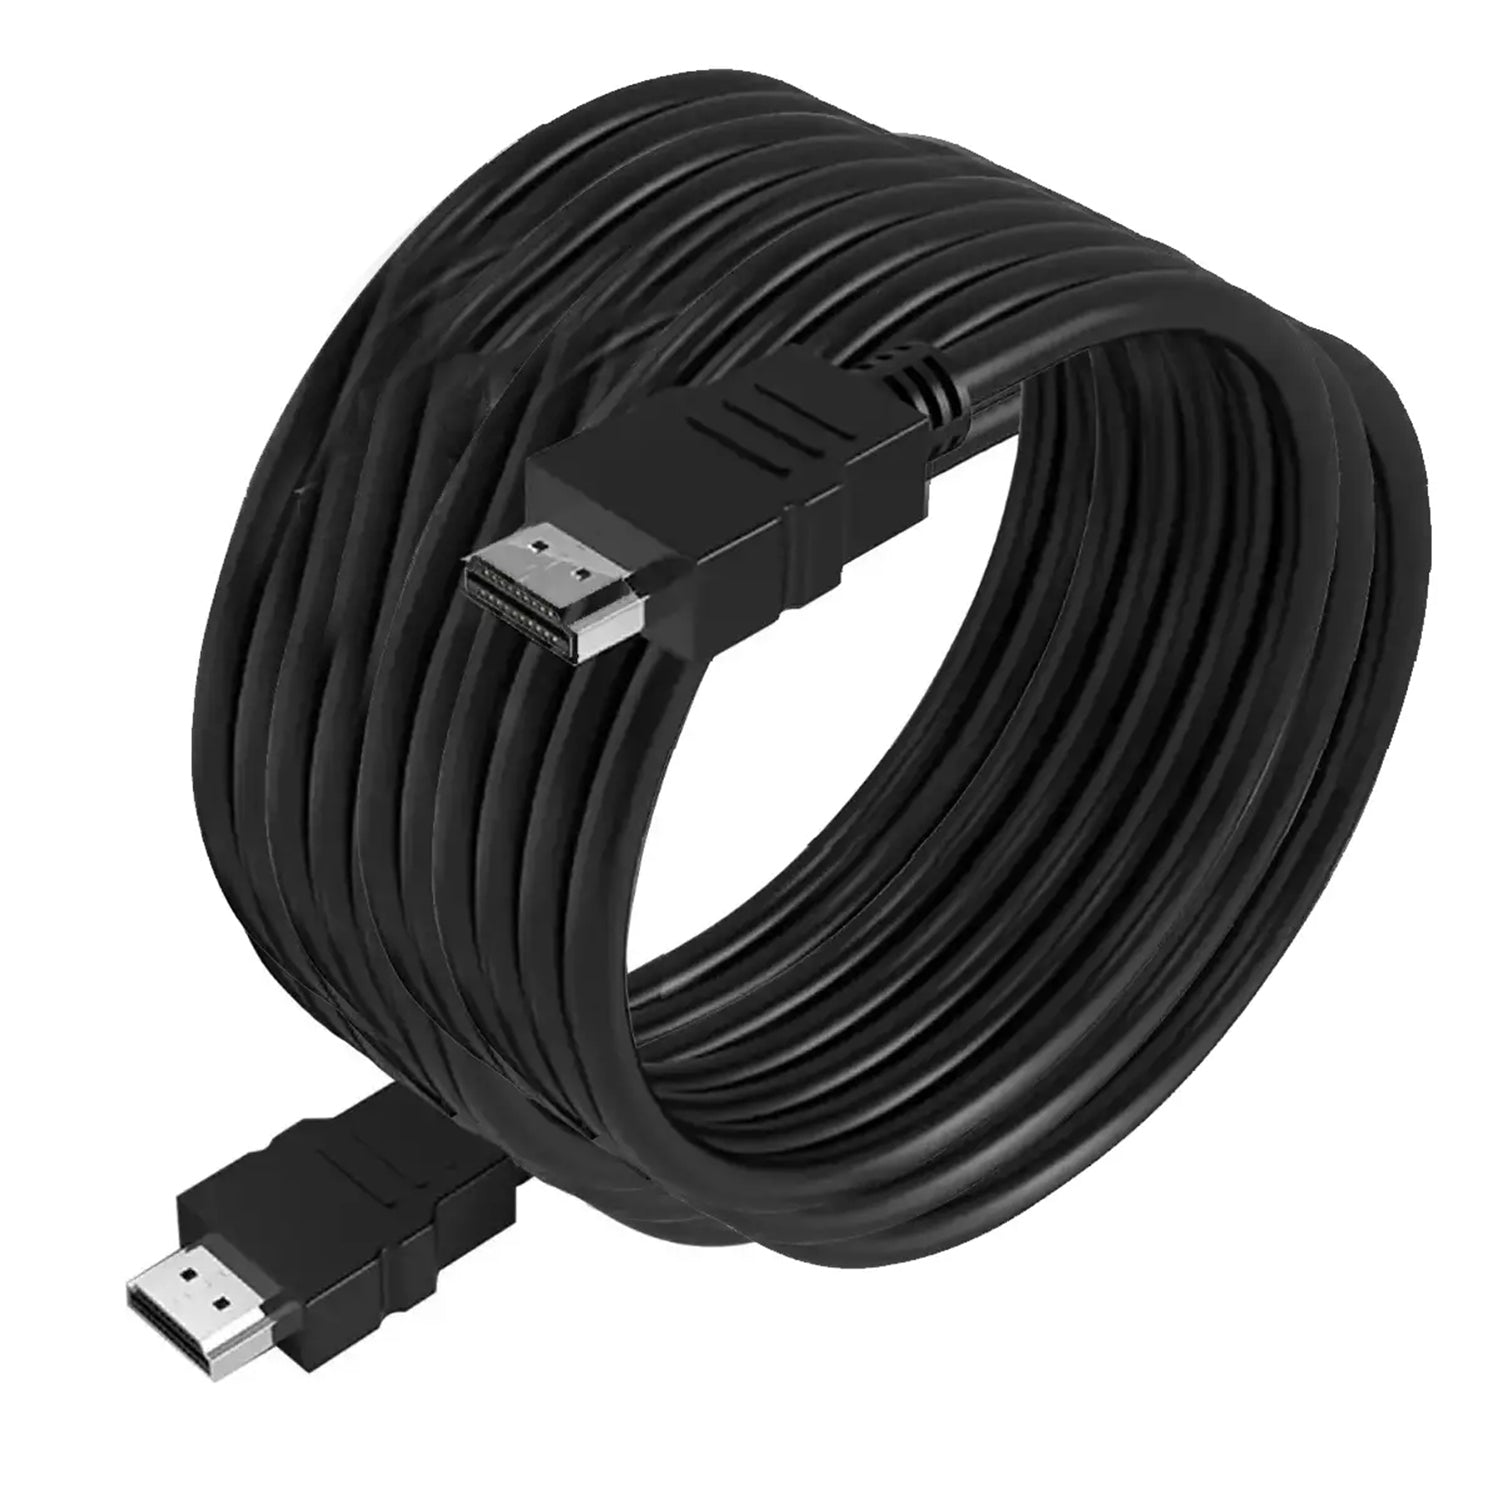 50FT HDMI to Hdmi High-Definition Television to PC Data Cable-Black